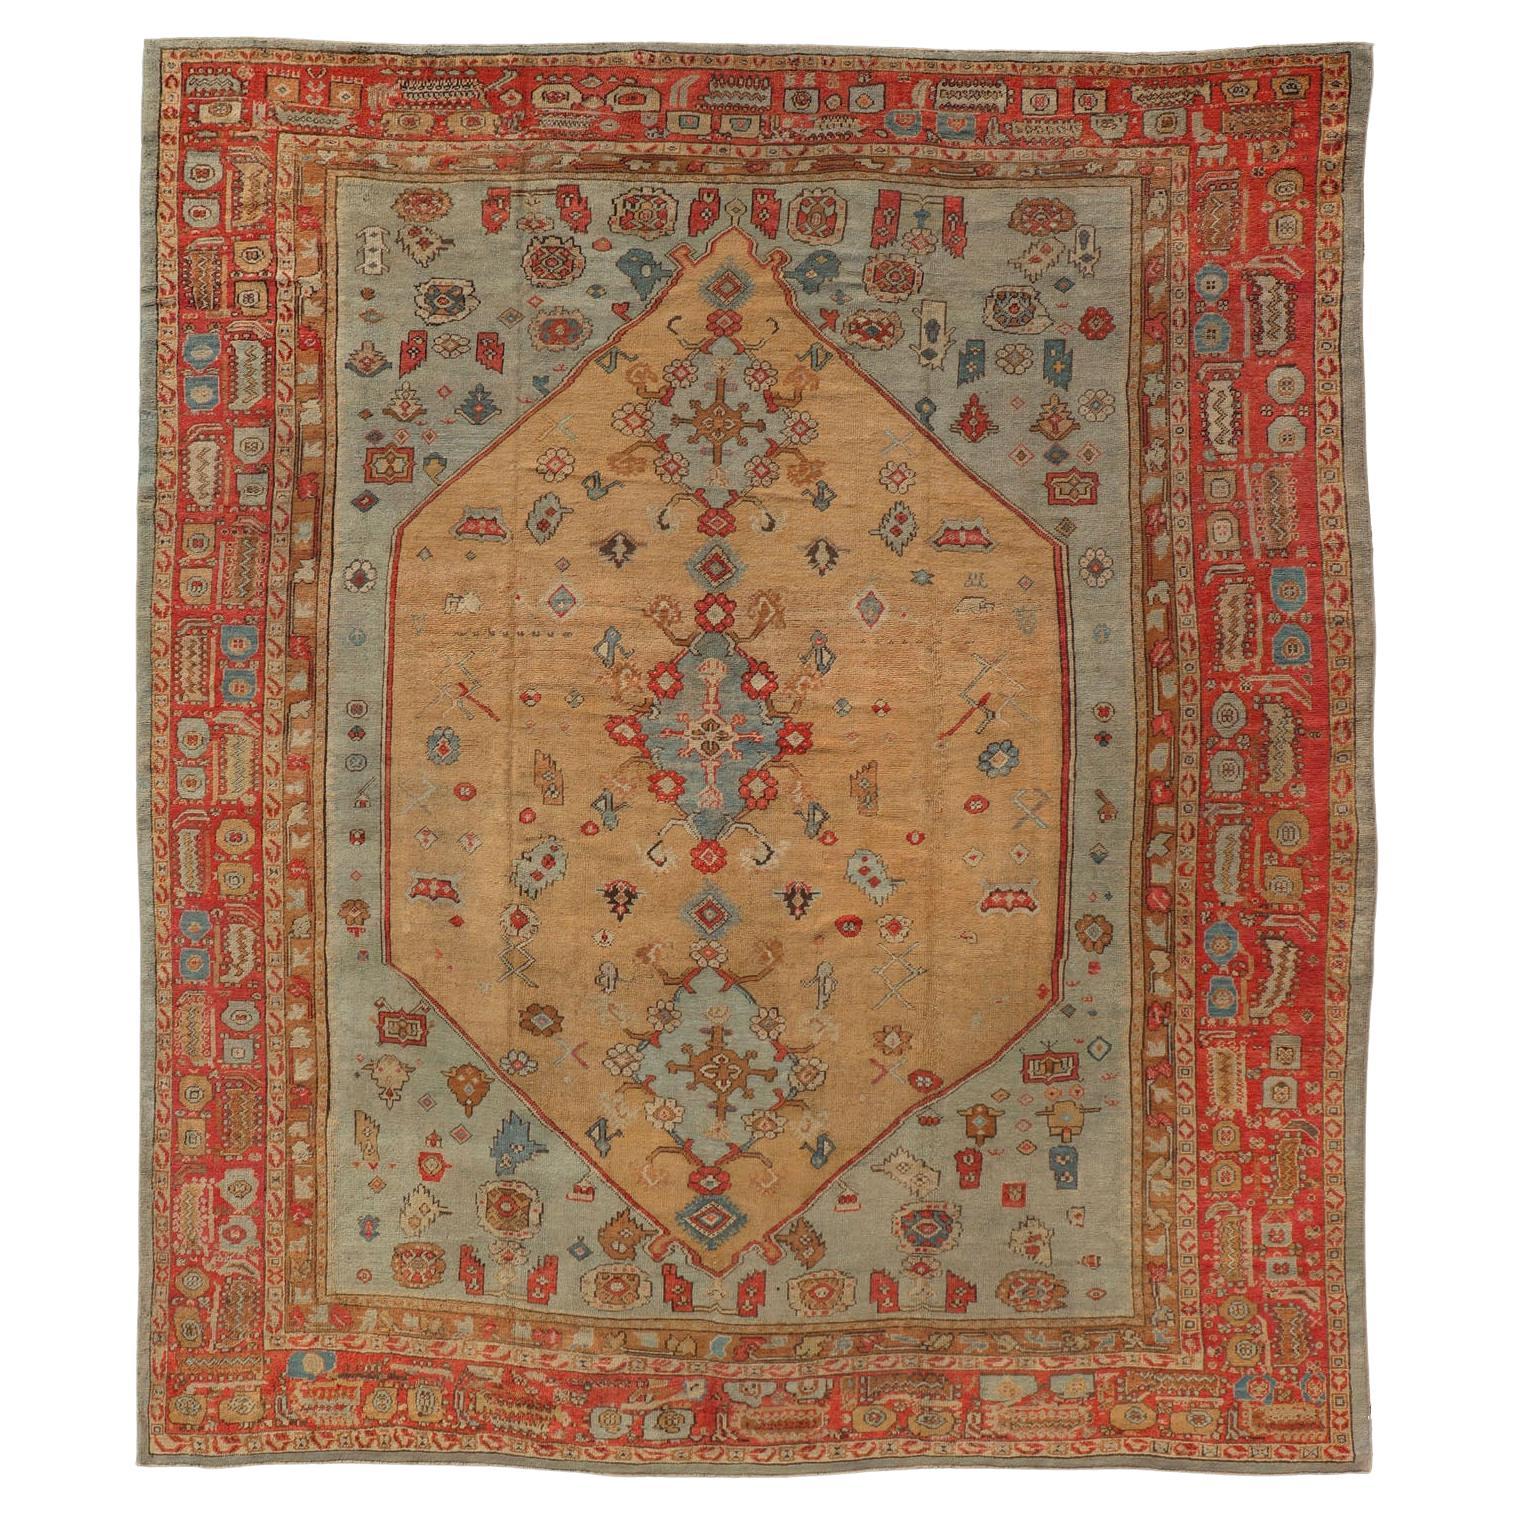 Antique Turkish Ghoirdes Oushak Rug With Medallion in Sky Blue, Tan, and Red